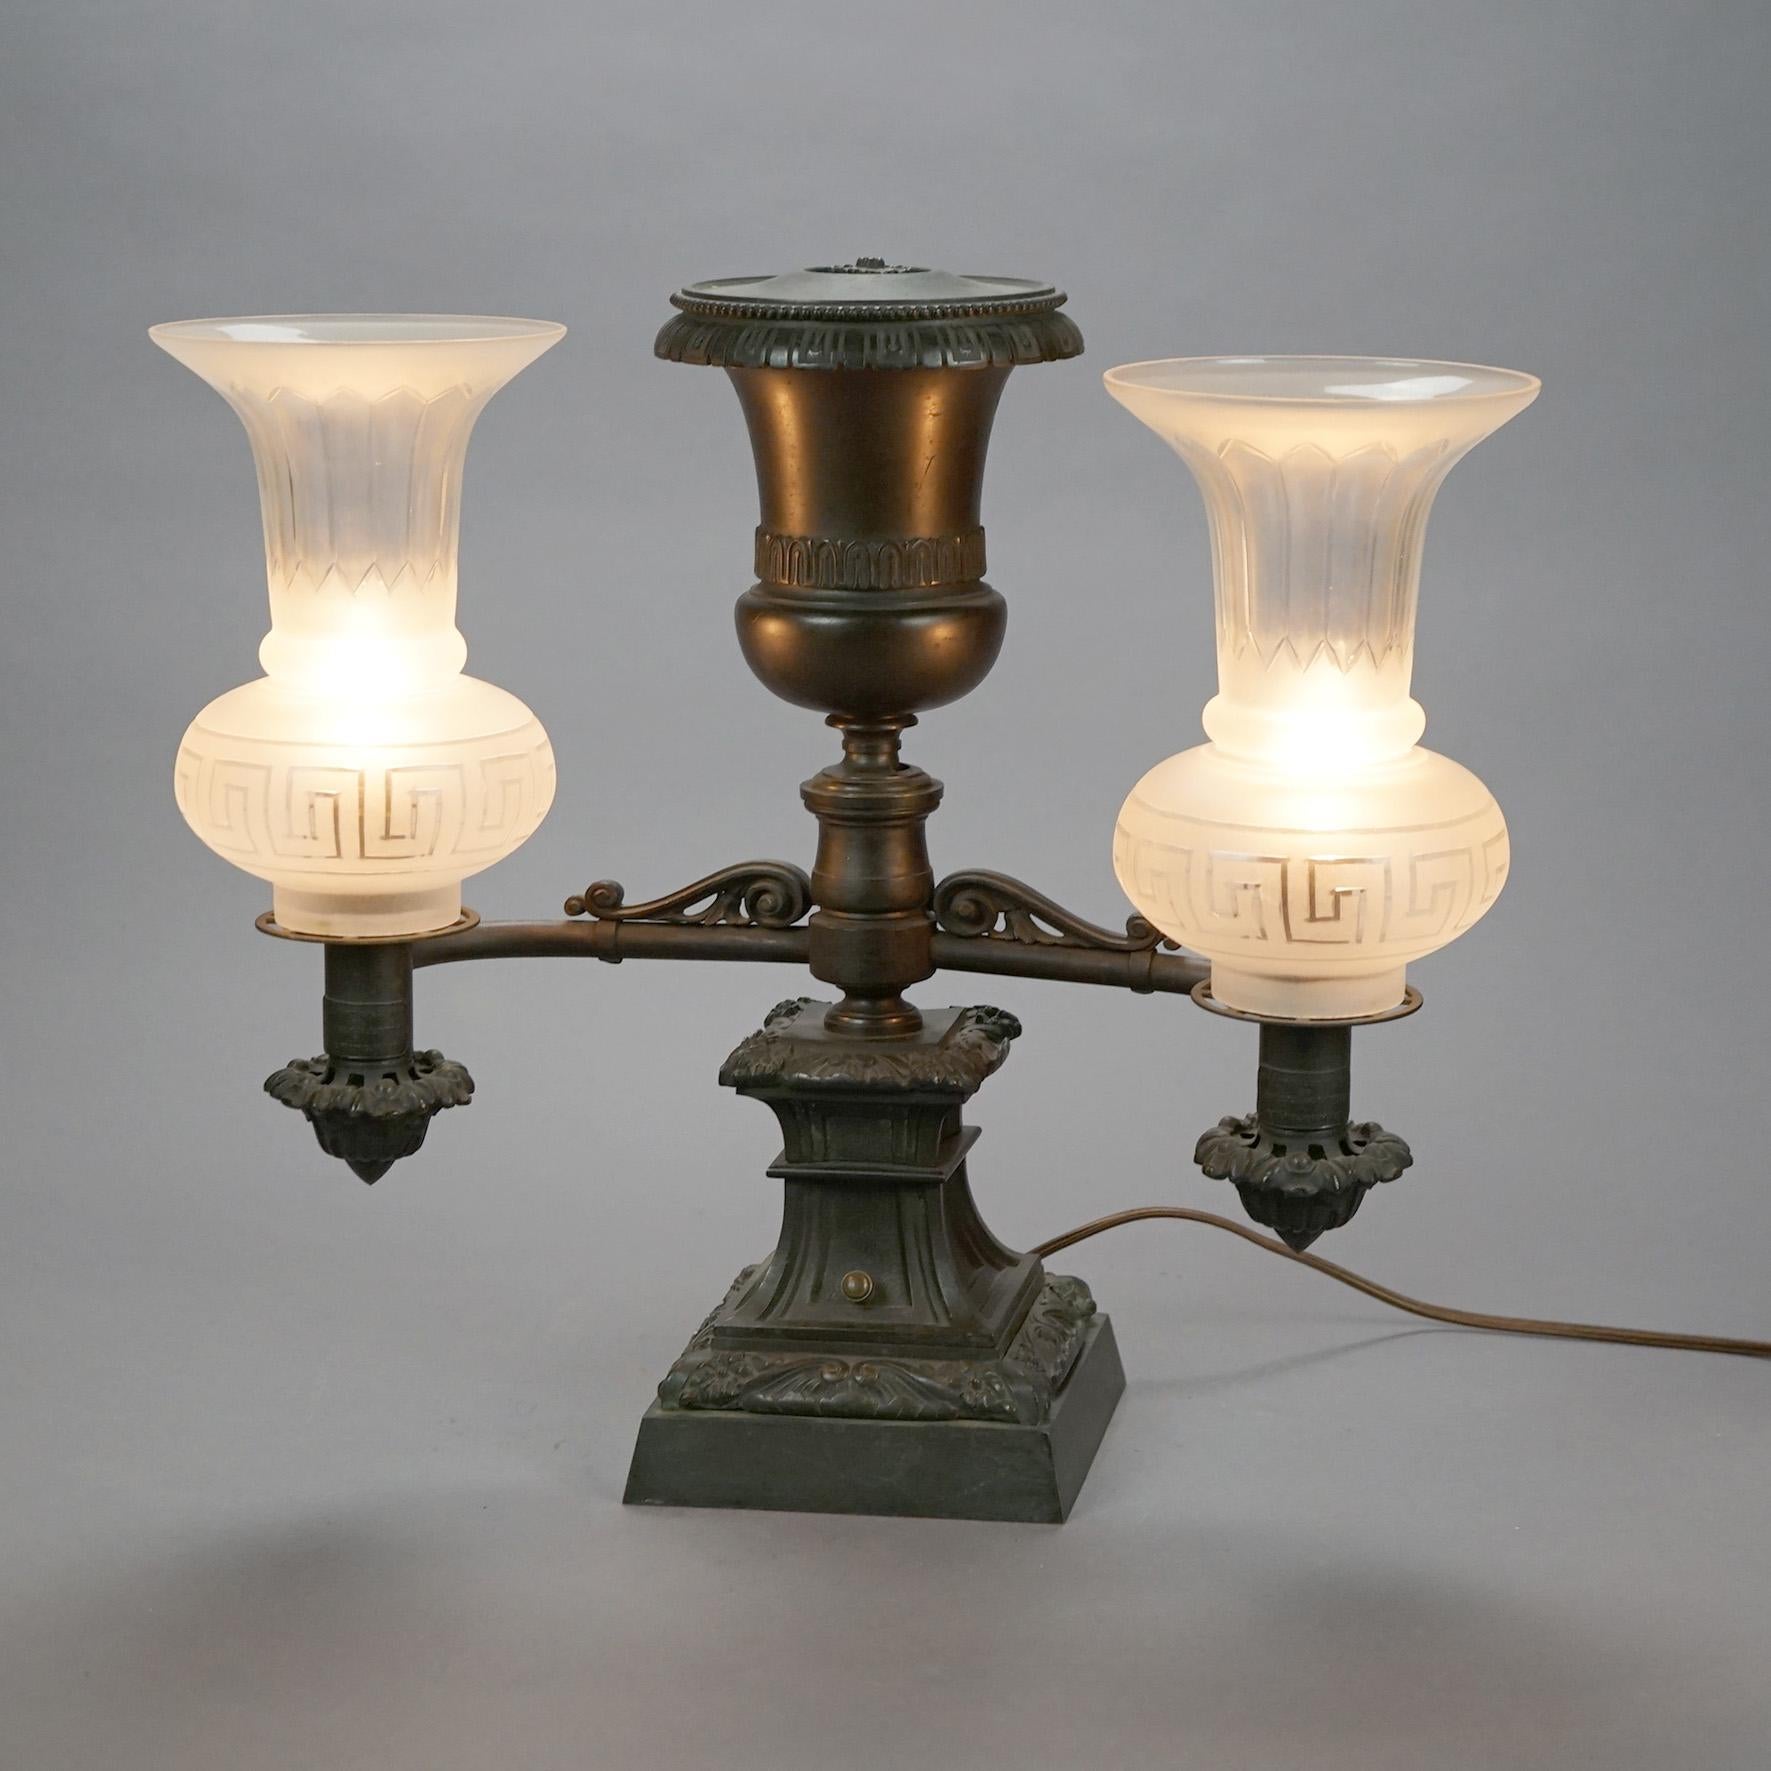 An antique pair of argand lamps by Messenger Co. offer cast bronze bases with Greco pedestal having double arms terminating in lights with Greek Key frosted shades, electrified, circa 1820s

Measures- 17''H x 18.5''W x 9.25''D.